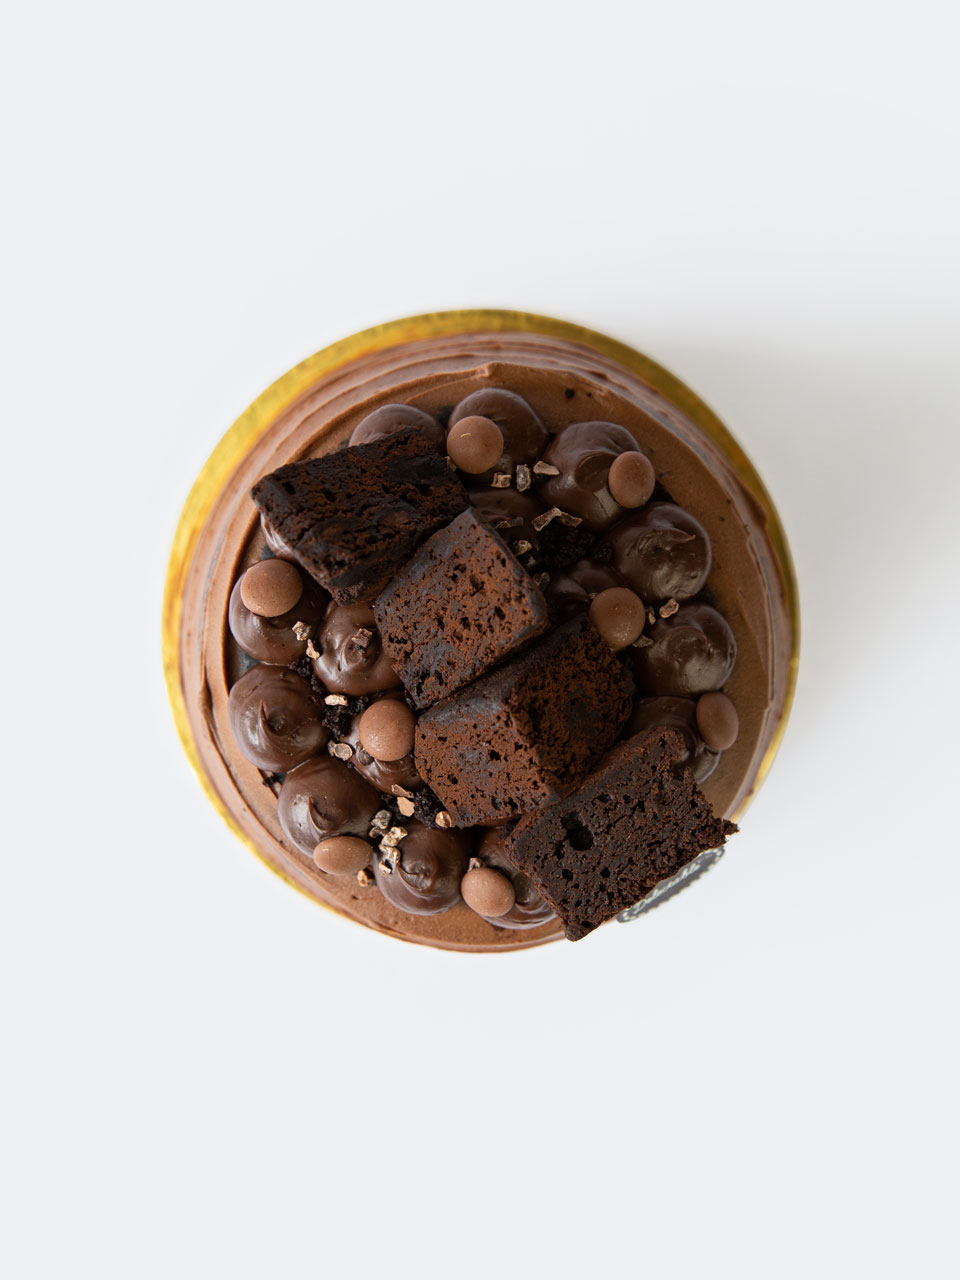 Delectable Chocolate Cake - Online cake delivery Malaysia